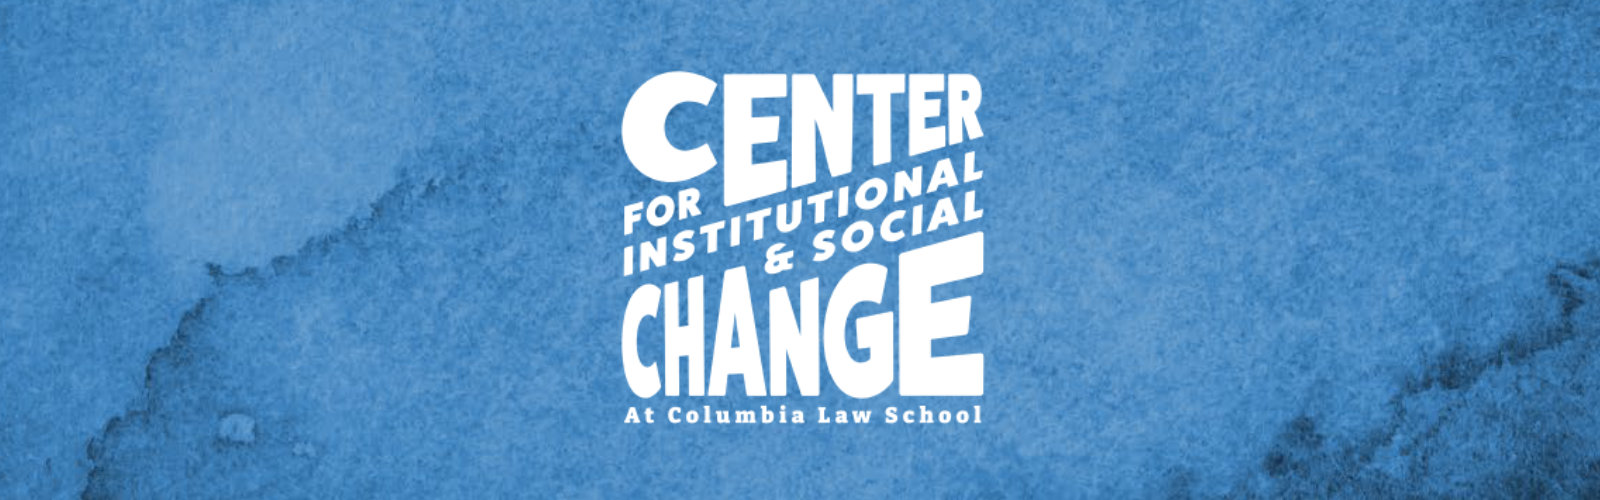 Center for Institutional and Social Change at Columbia Law School